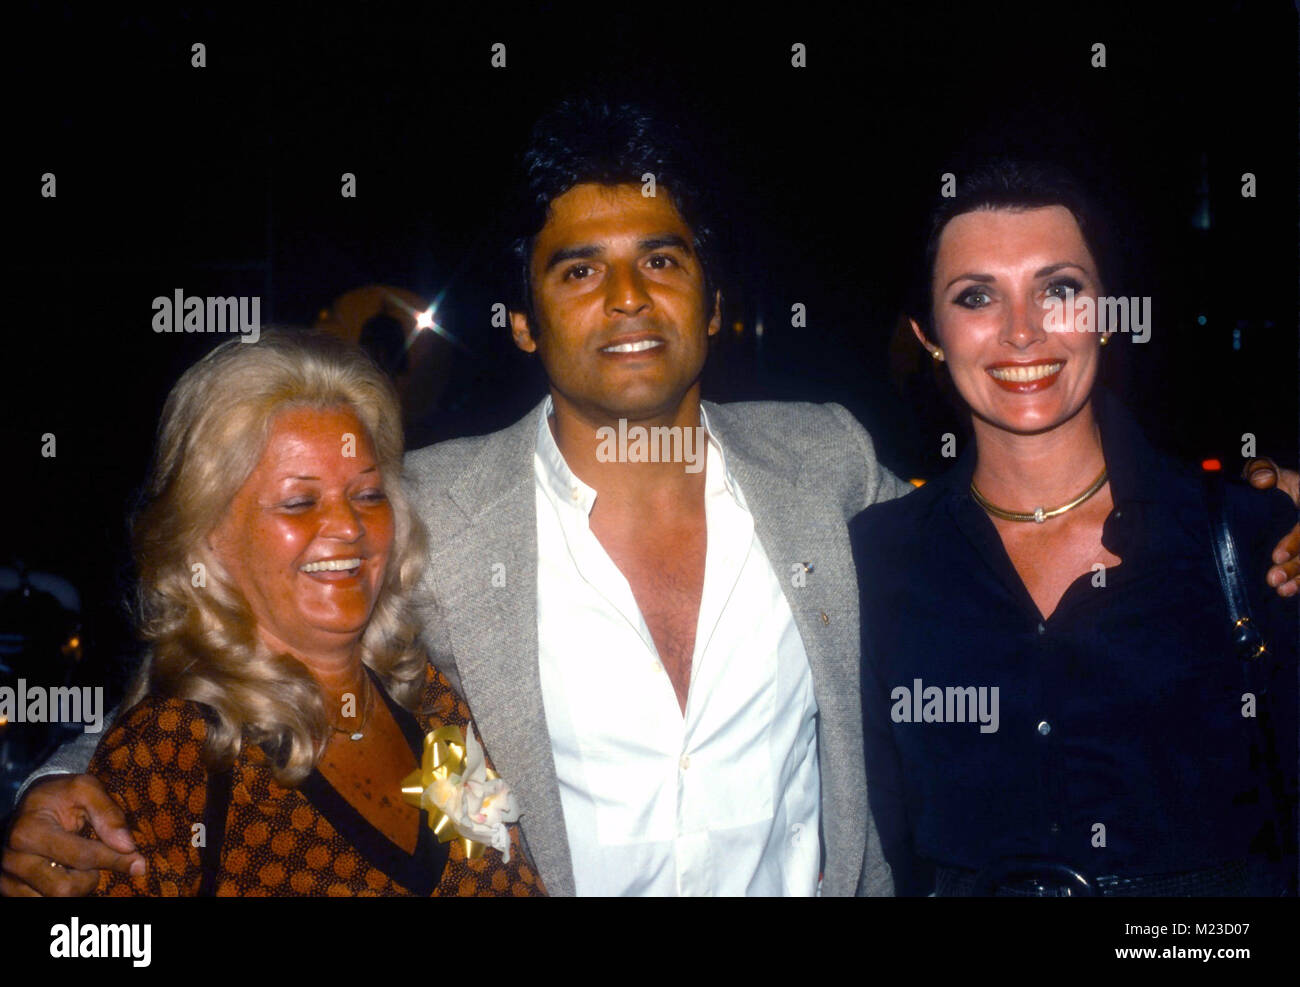 LOS ANGELES, CA - MAY 9: Actor Erik  Estrada and mother and wife attend event honoring Carol Burnett on May 9, 1981 at the Century Plaza Hotel in Los Angeles, California. Photo by Barry King/Alamy Stock Photo Stock Photo